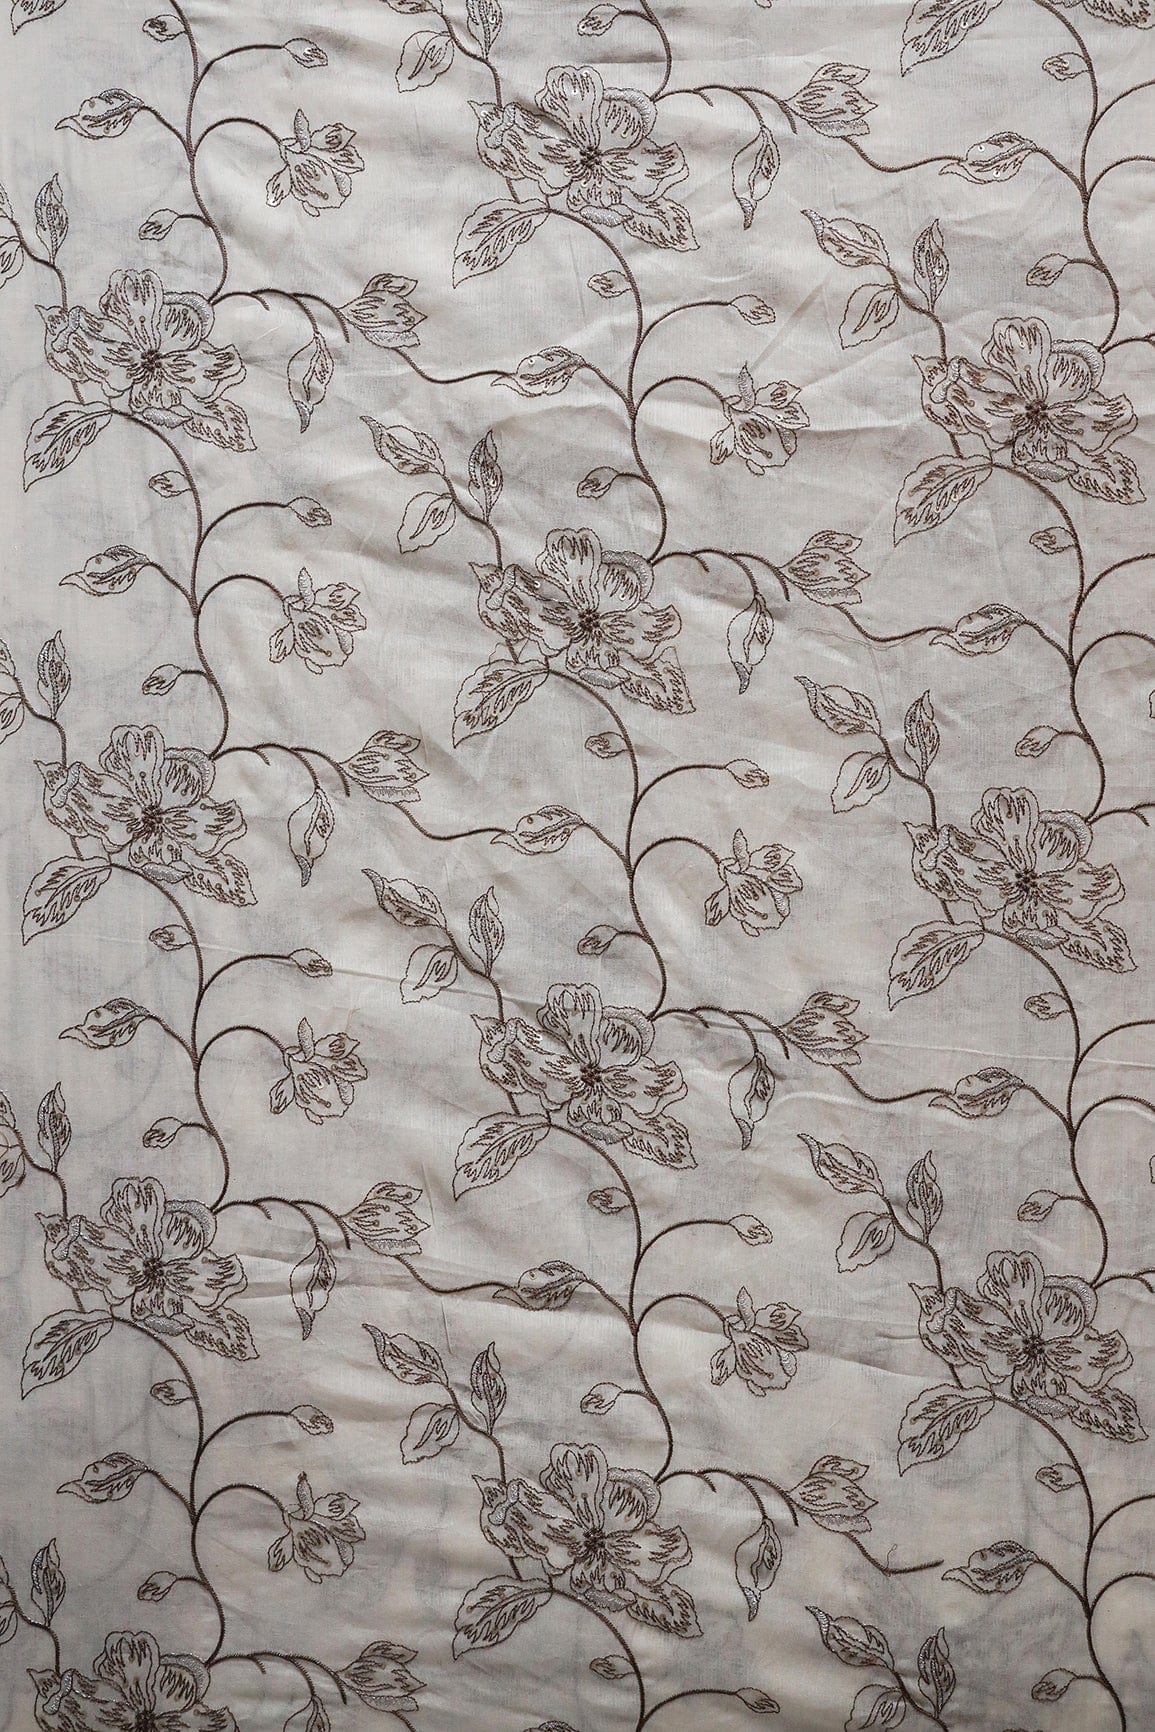 doeraa Embroidery Fabrics Brown Thread With Silver Sequins Floral Embroidery Work On White Organic Cotton Fabric